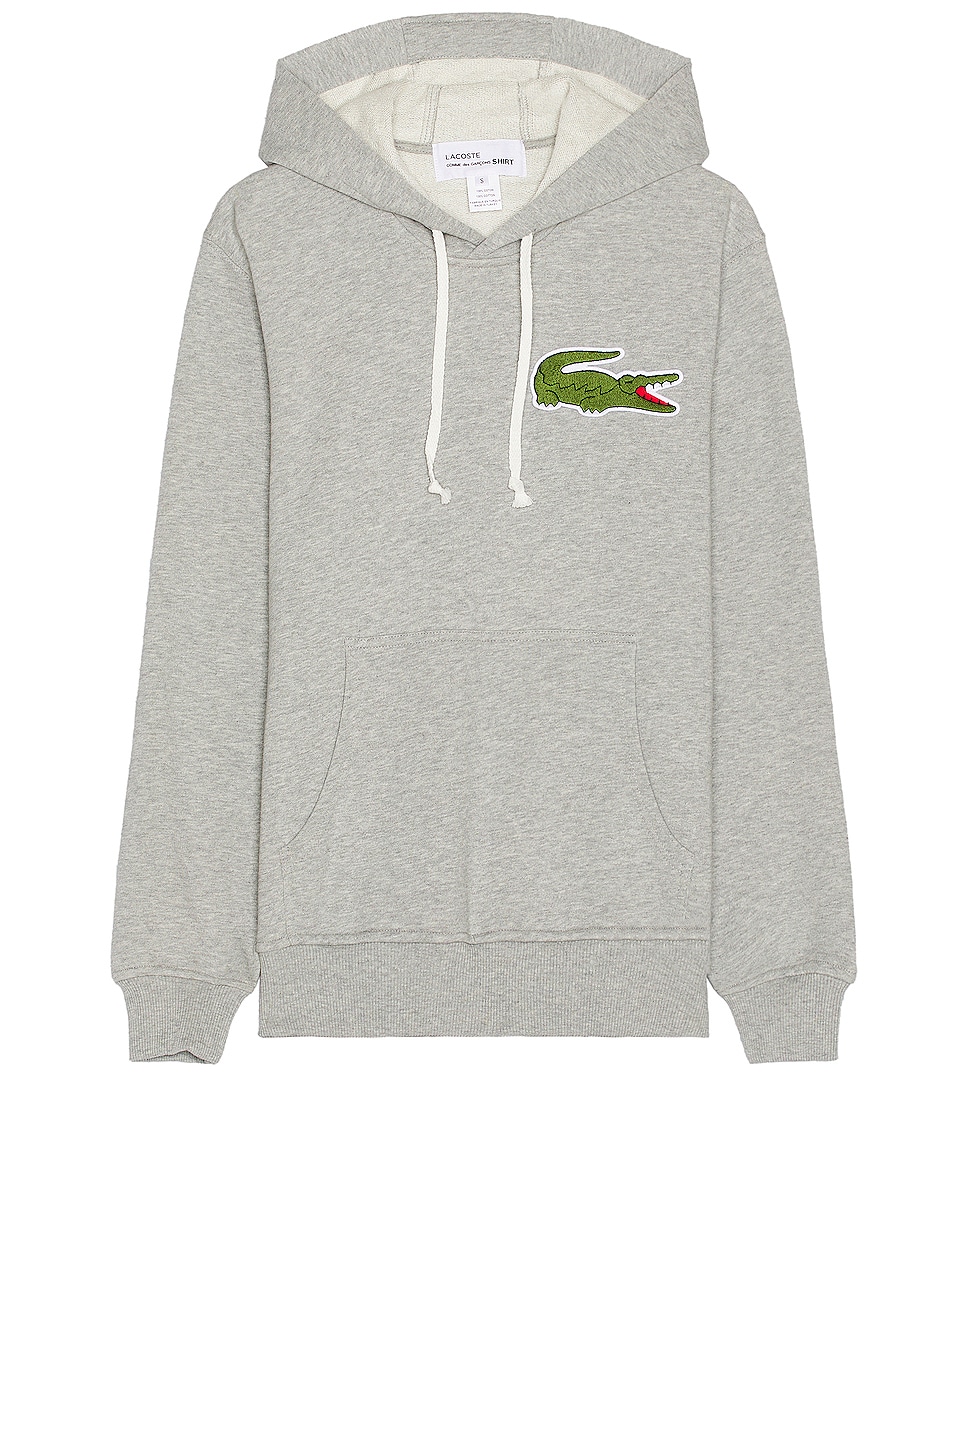 Image 1 of COMME des GARCONS SHIRT X Lacoste Hoodie in Grey